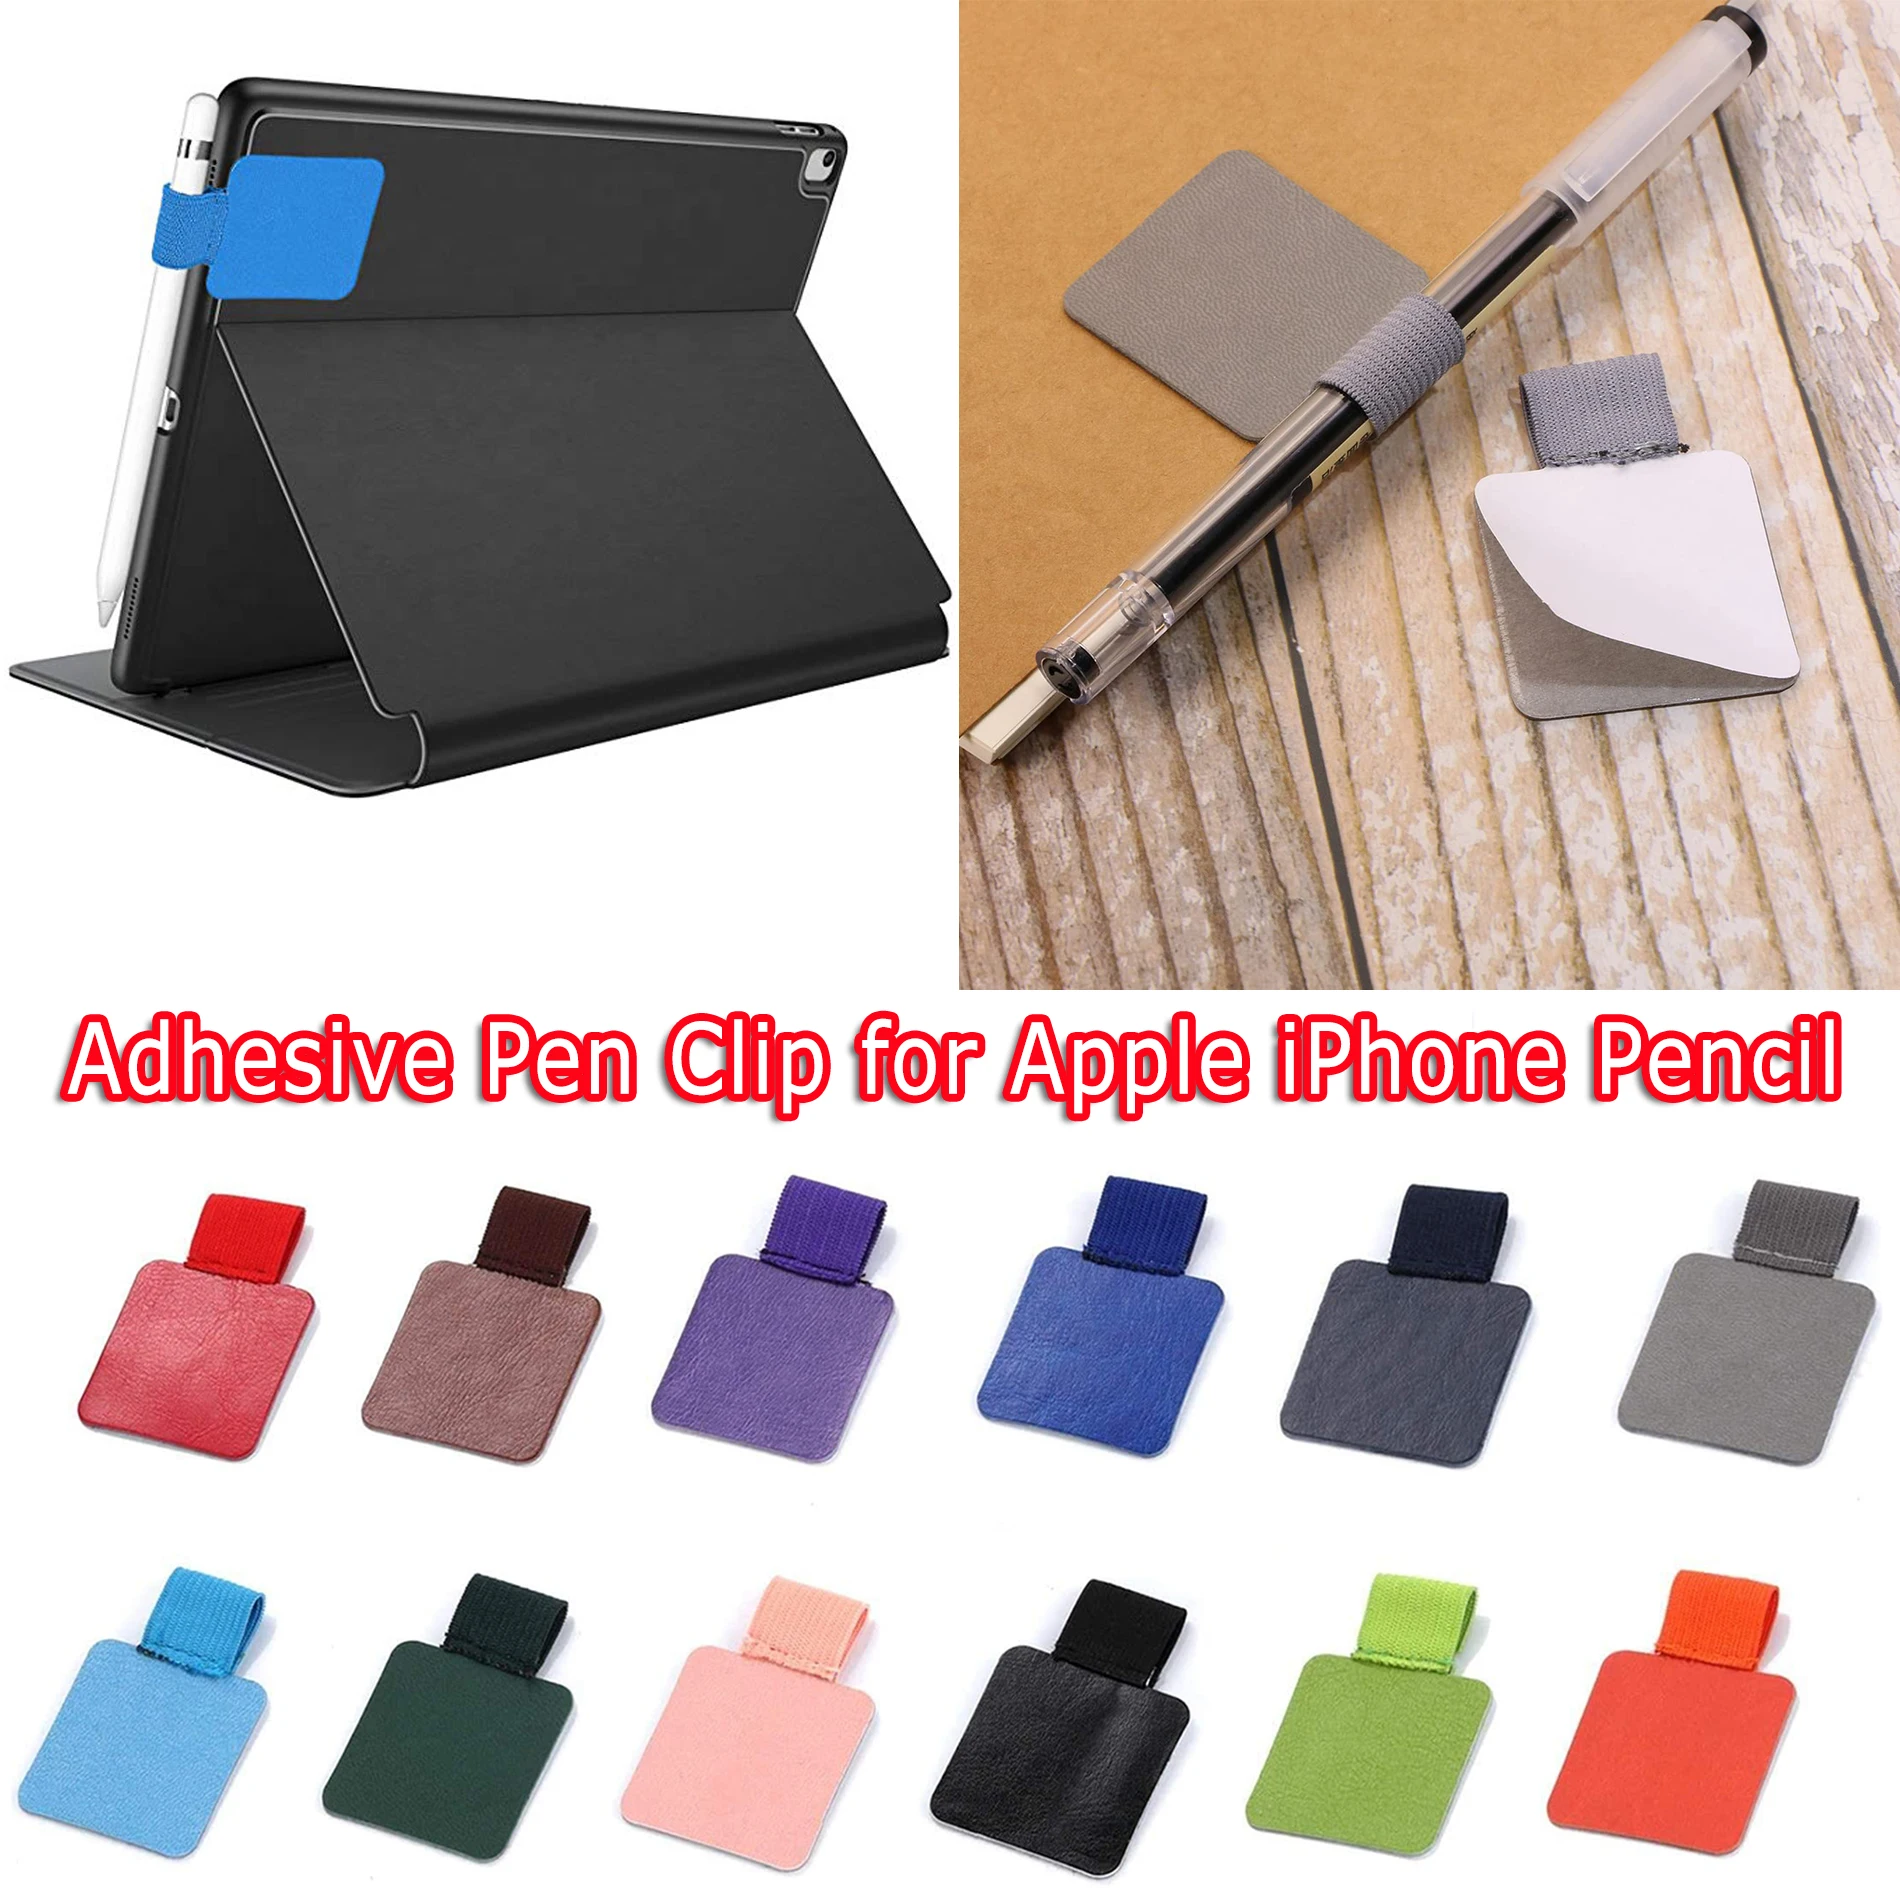 Adhesive Pen Clip Protective Case PU Leather Notebook Elastic Loop Cover For Diary Planner Clip For Apple iPhone Pencil Holder